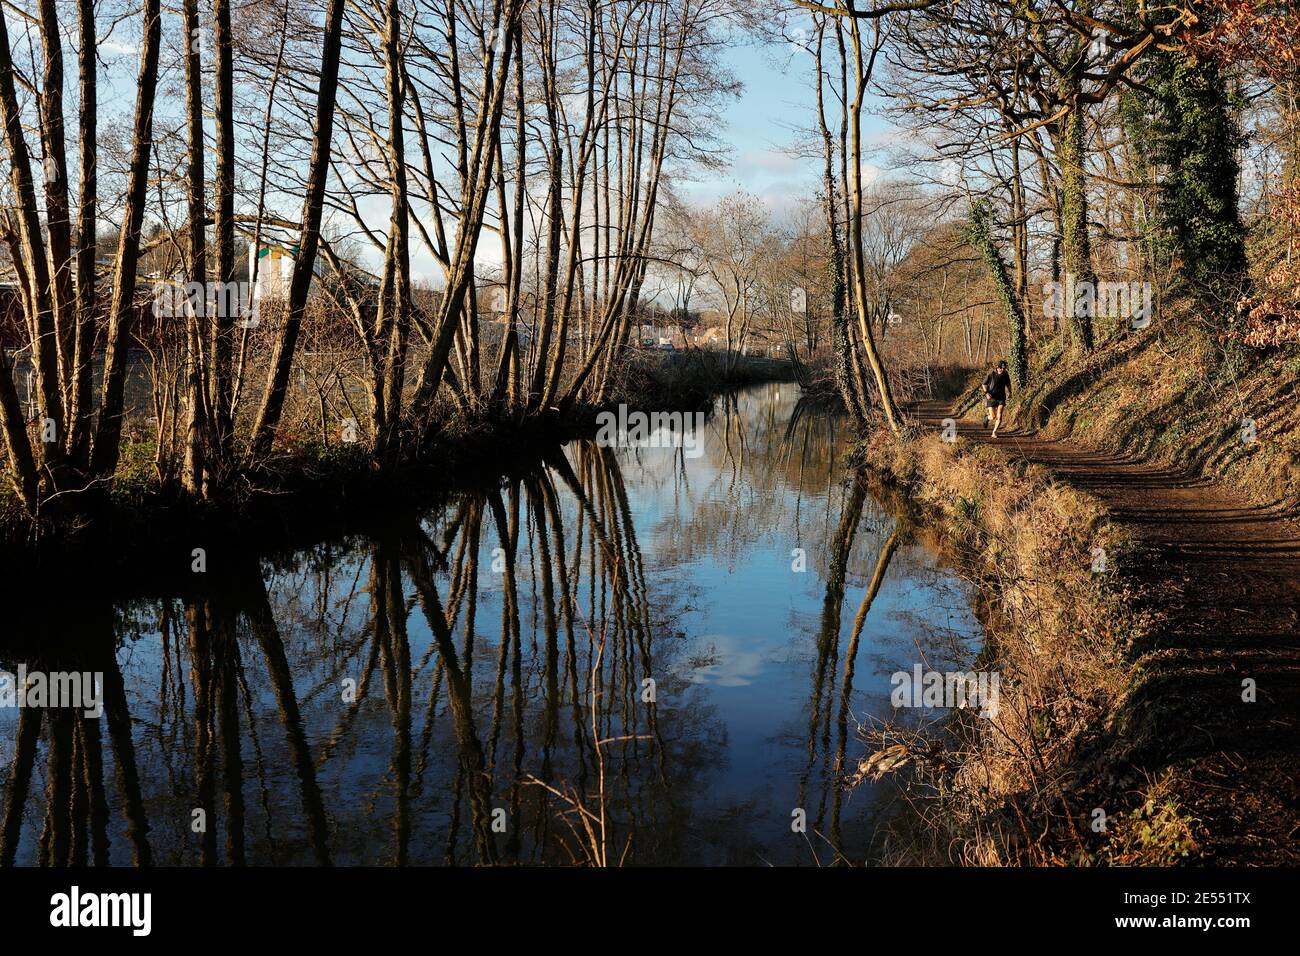 Canal de Chesterfield Derbyshire Angleterre Banque D'Images